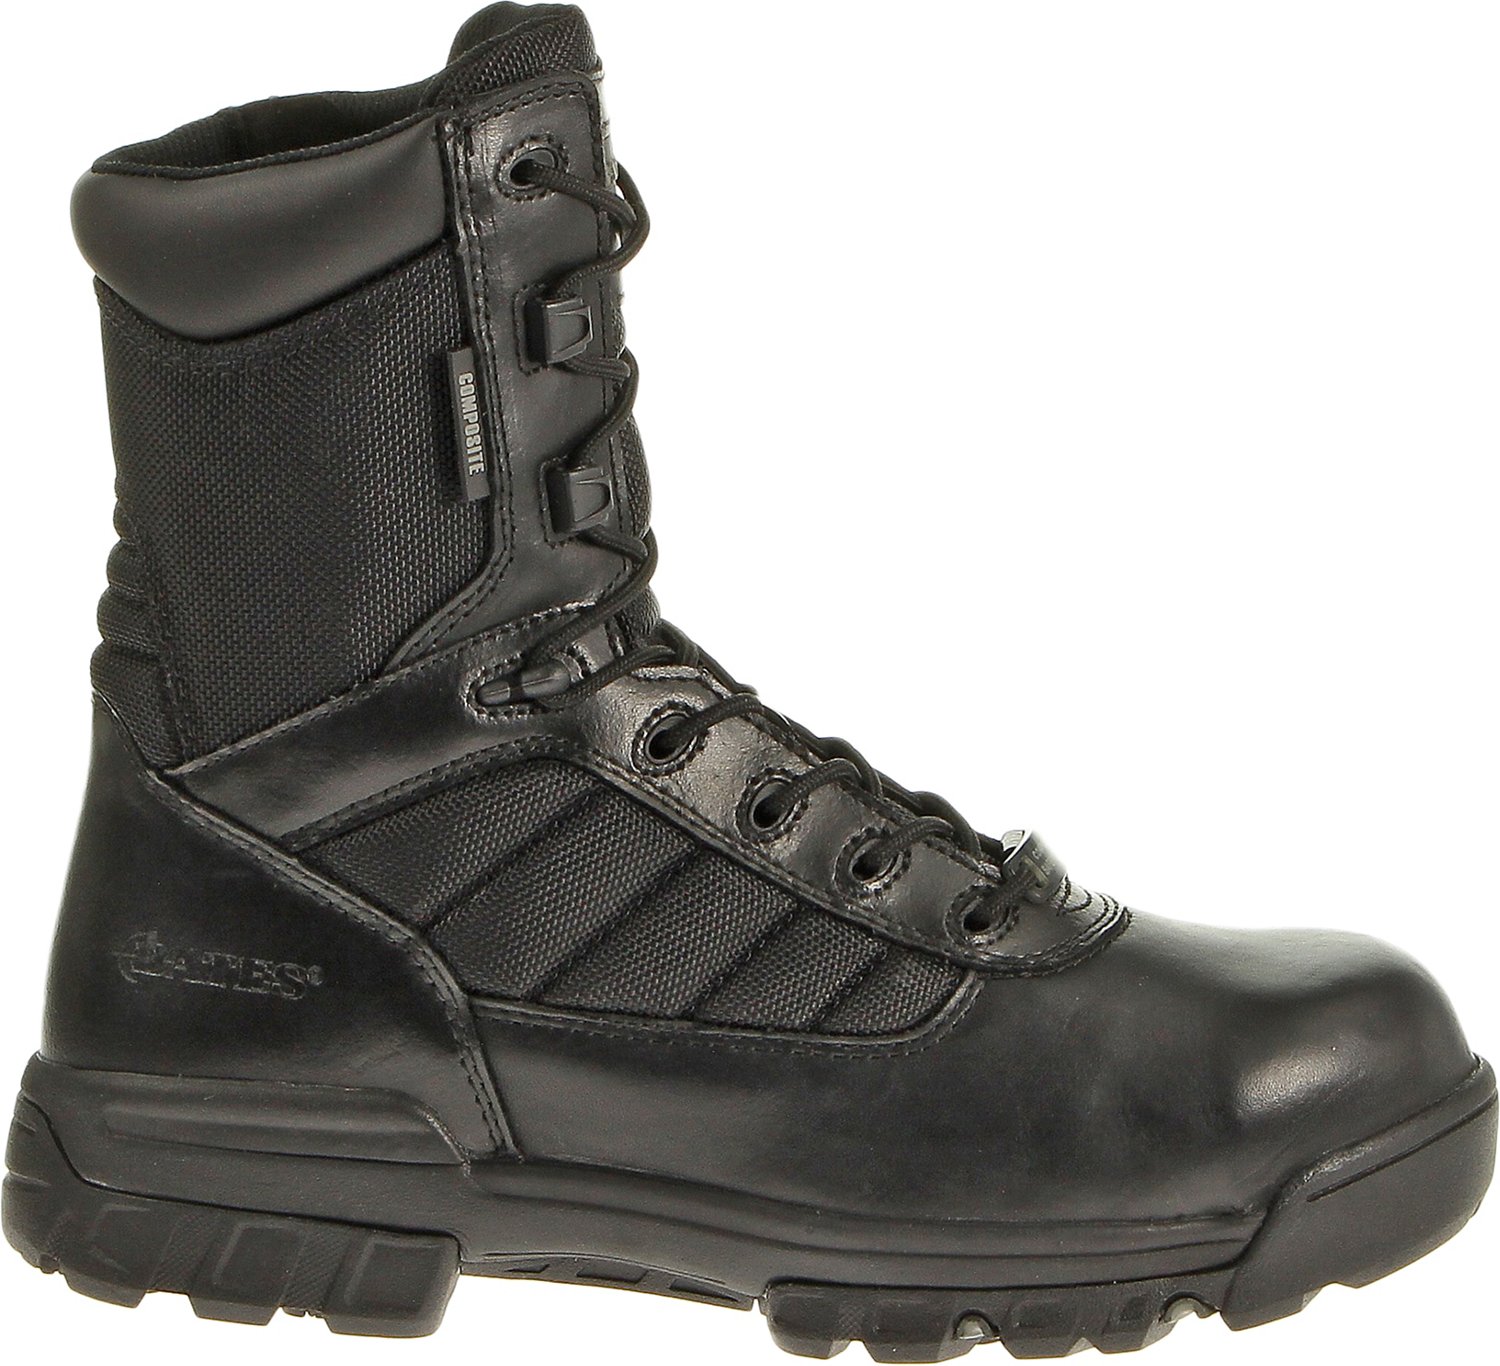 Buy Work Boots Online | Work Shoes 